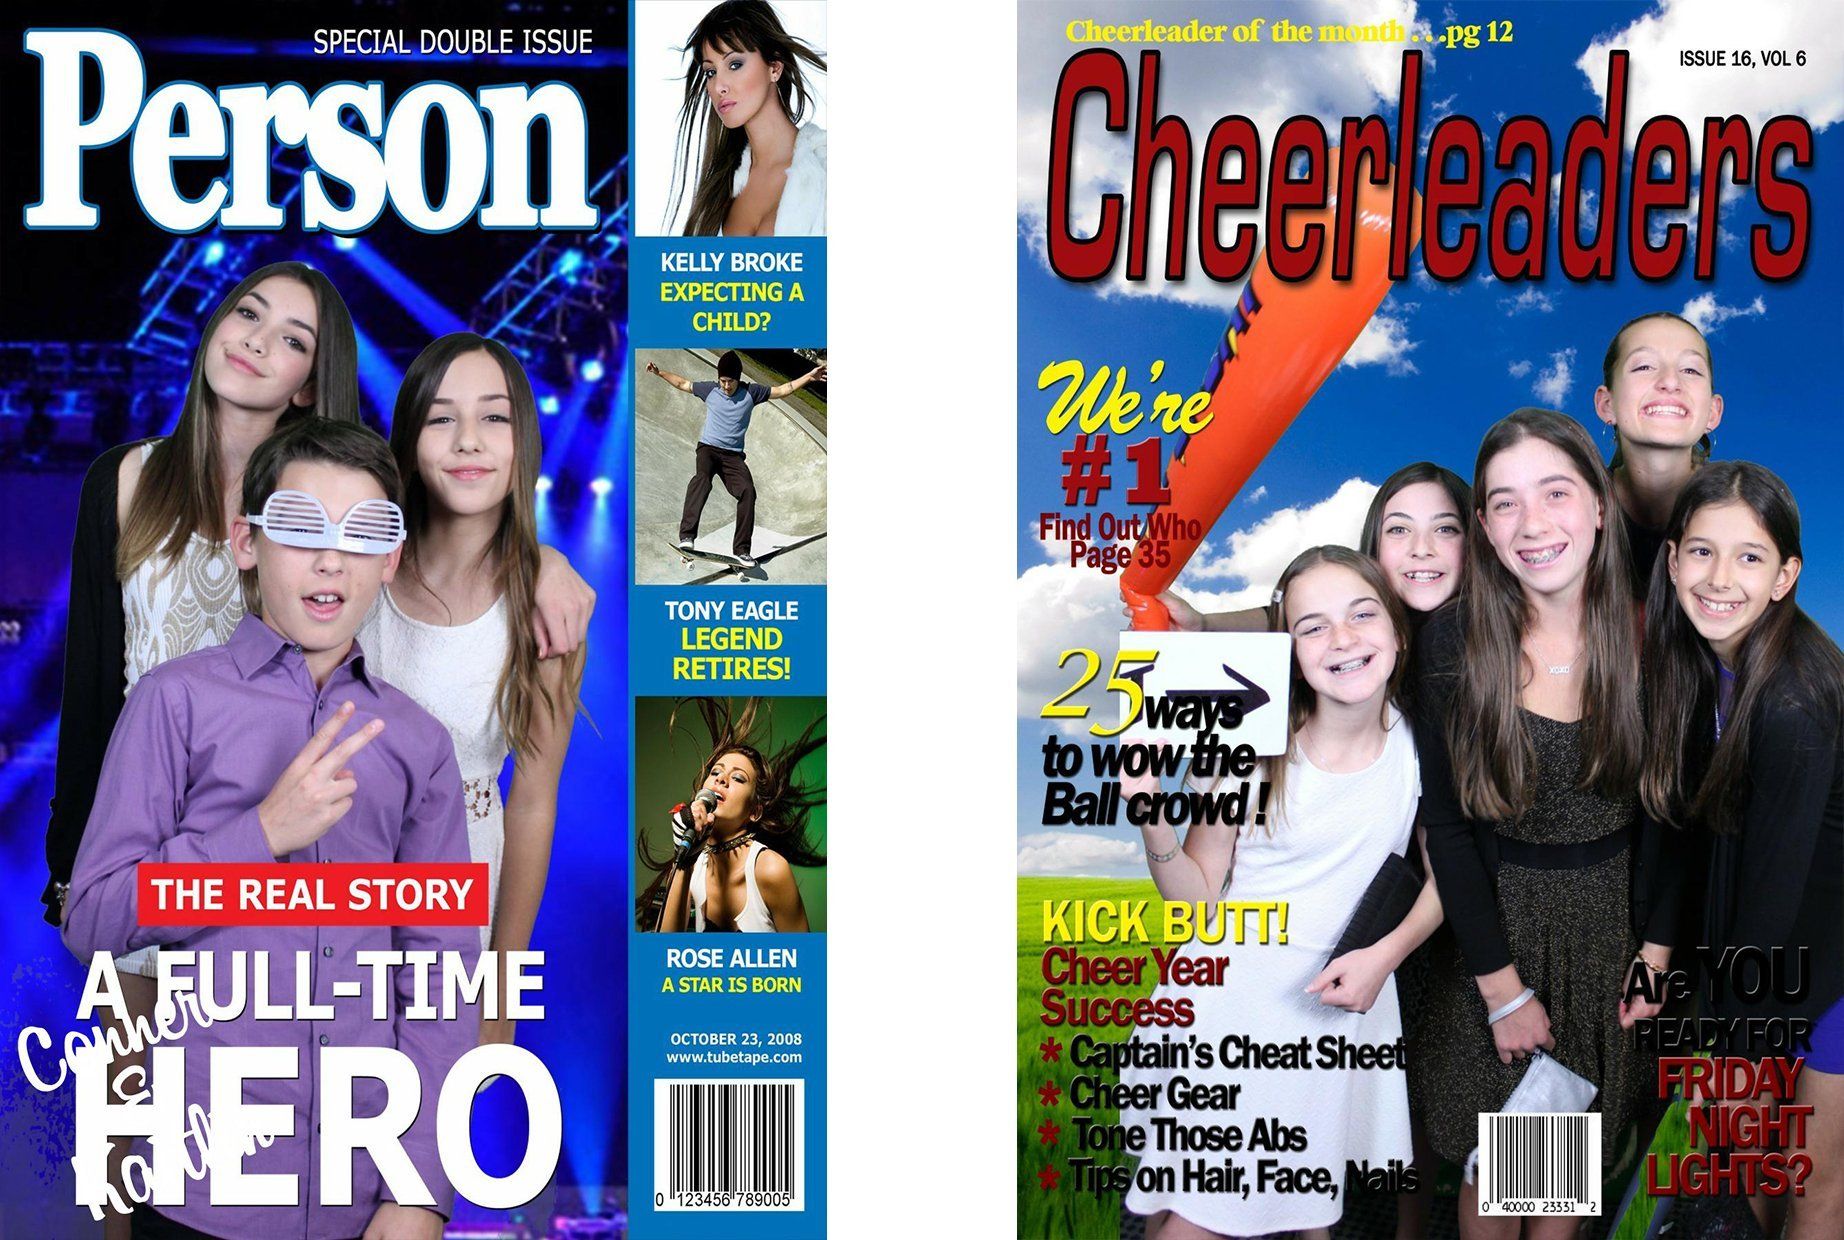 Green Screen Novelty Photos Magazine Covers for Events